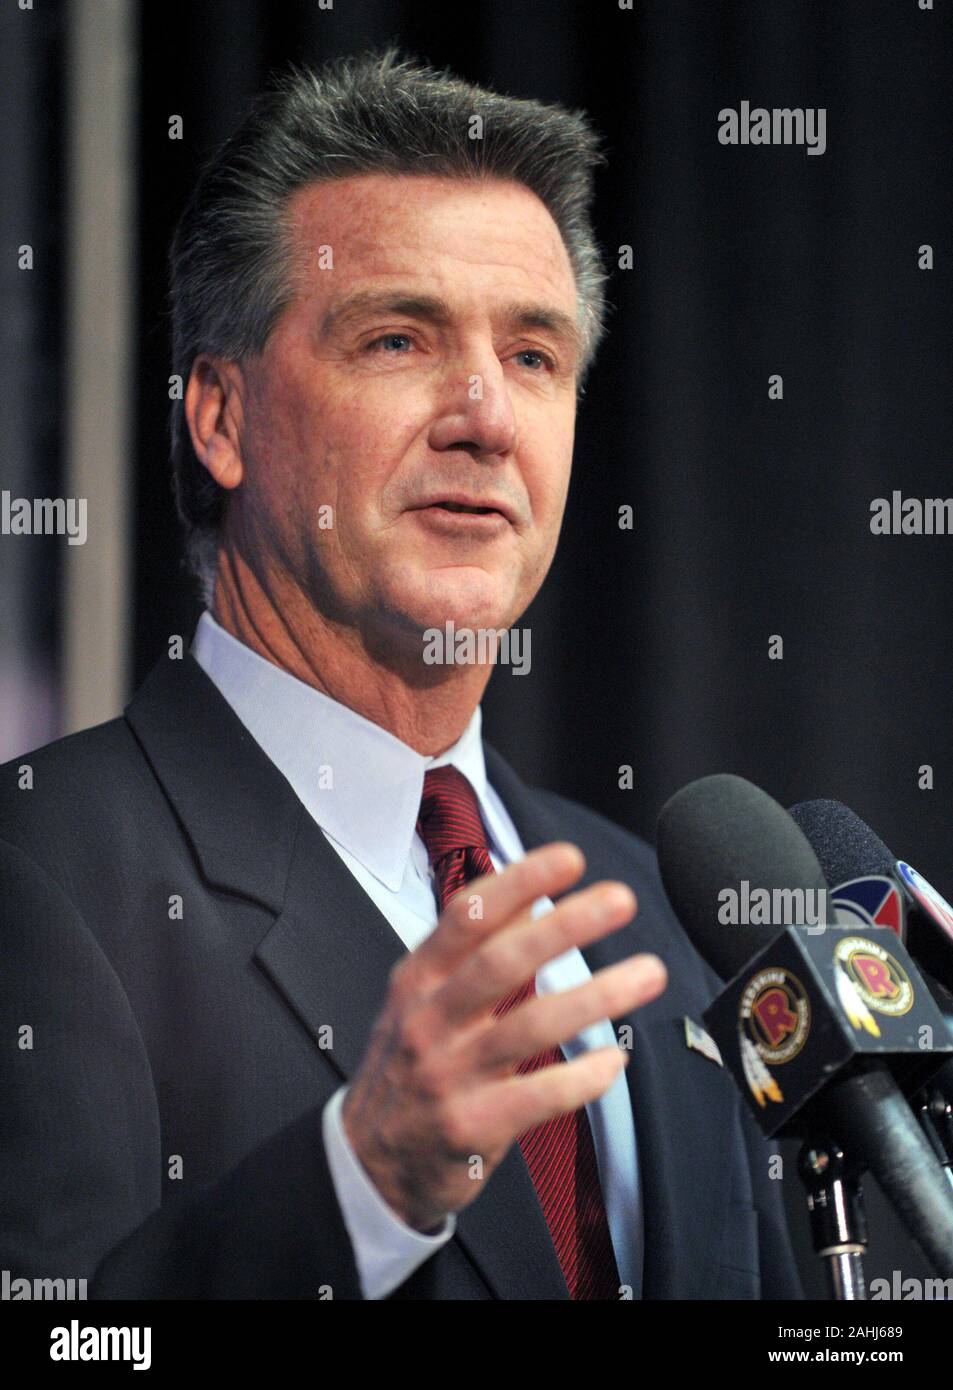 Ashburn, VA - January 6, 2010 -- Washington Redskins executive vice president/general manager Bruce Allen introduces Mike Shanahan, new head coach of the Washington Redskins at a press conference at Redskins Park in Ashburn Virginia on Wednesday, January 6, 2010.Credit: Ron Sachs/CNP | usage worldwide Stock Photo